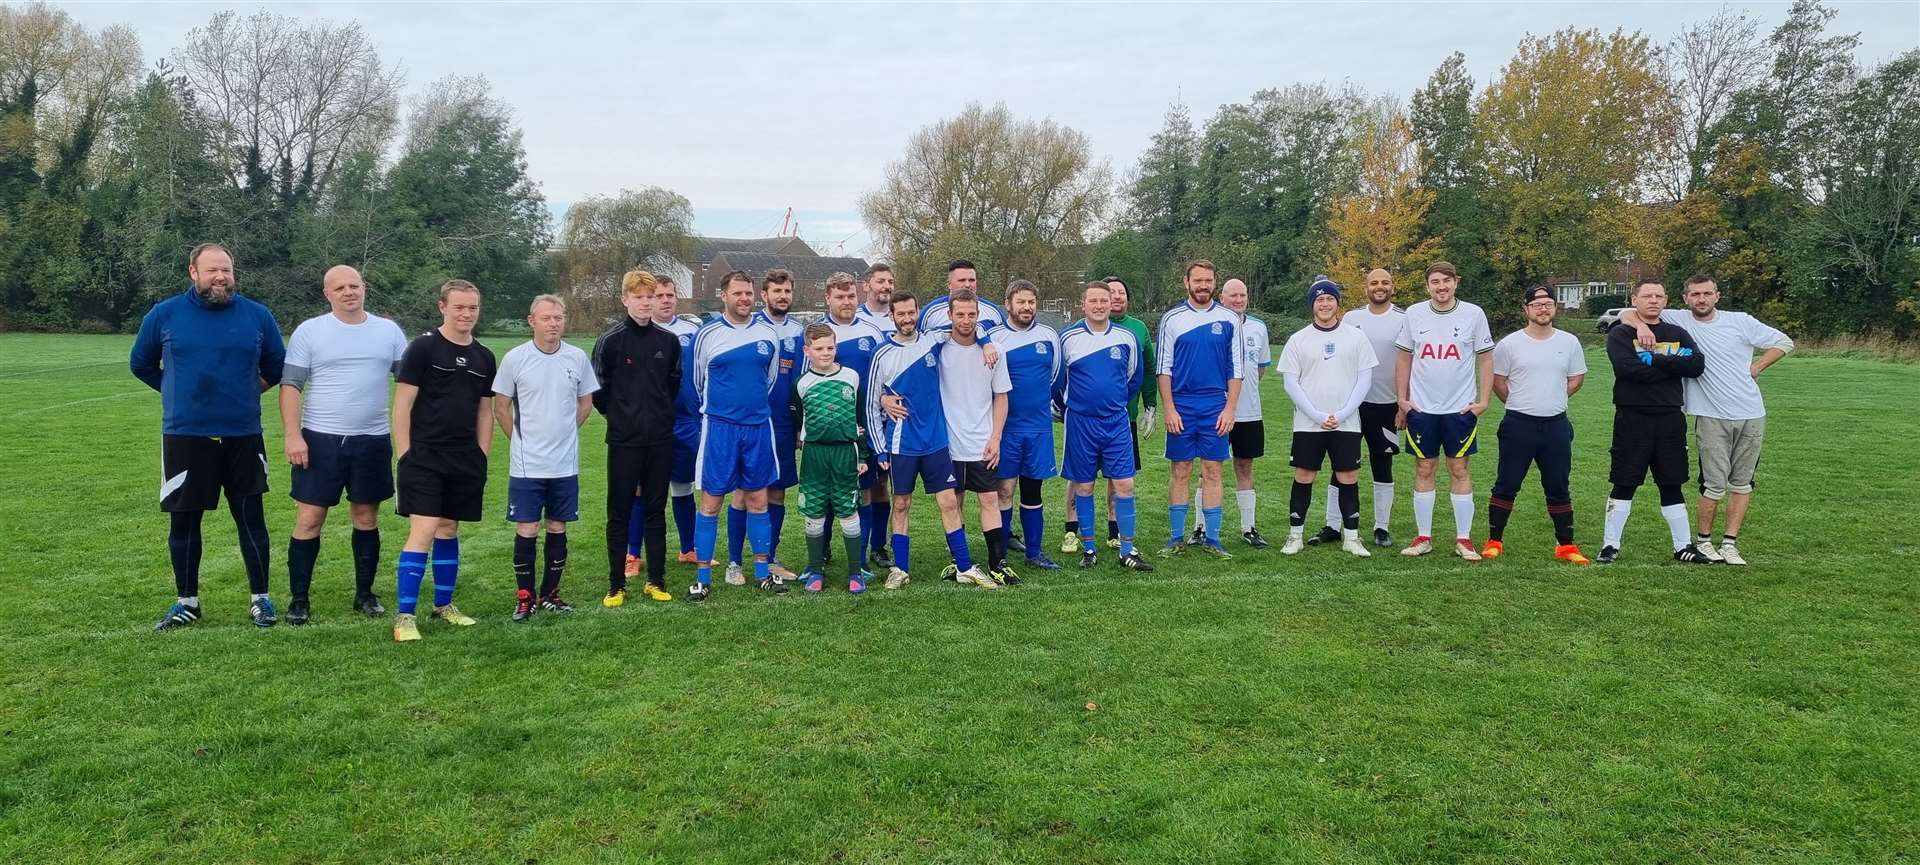 A fundraising football match for Kenzie Tippett was held between Bromley Green FC Coaches and Parents (60708969)